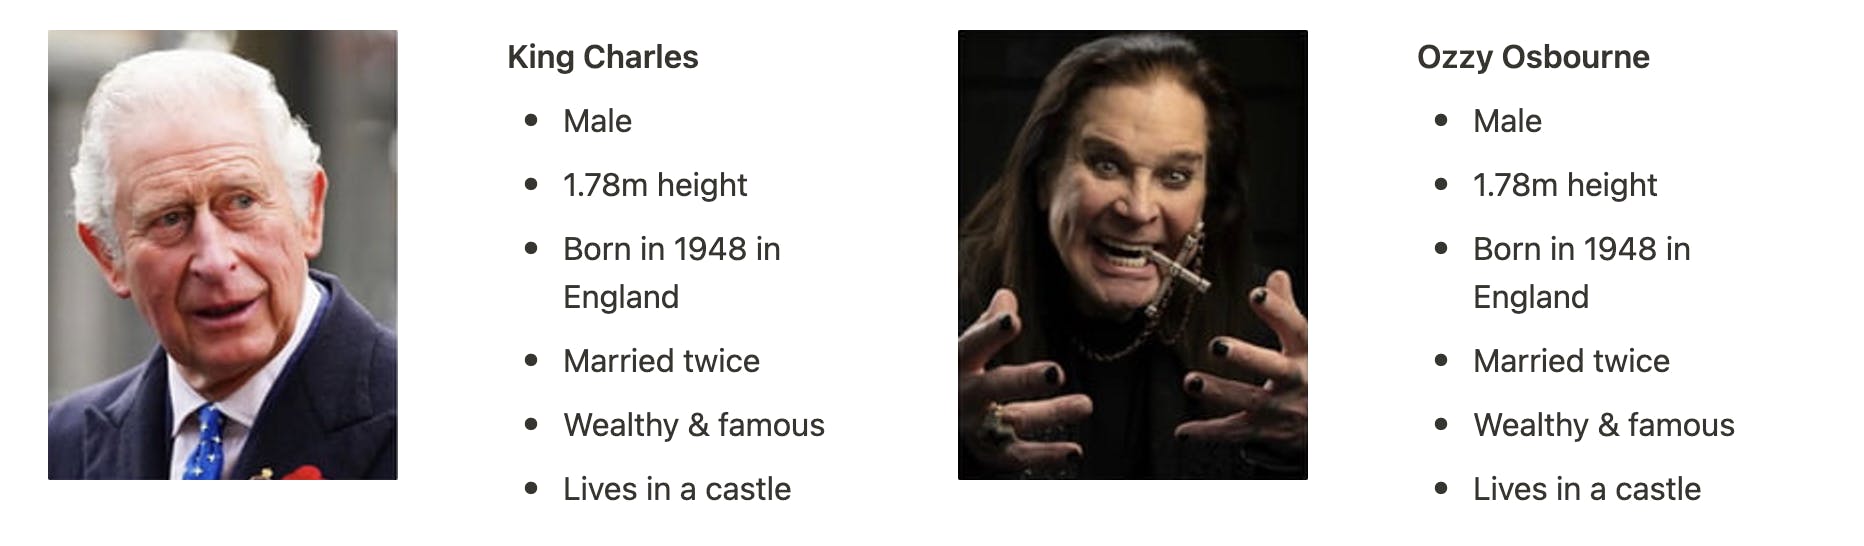 **King Charles**  - Male - 1.78m height - Born in 1948 in England - Married twice - Wealthy & famous - Lives in a castle. **Ozzy Osbourne**  - Male - 1.78m height - Born in 1948 in England - Married twice - Wealthy & famous - Lives in a castle.